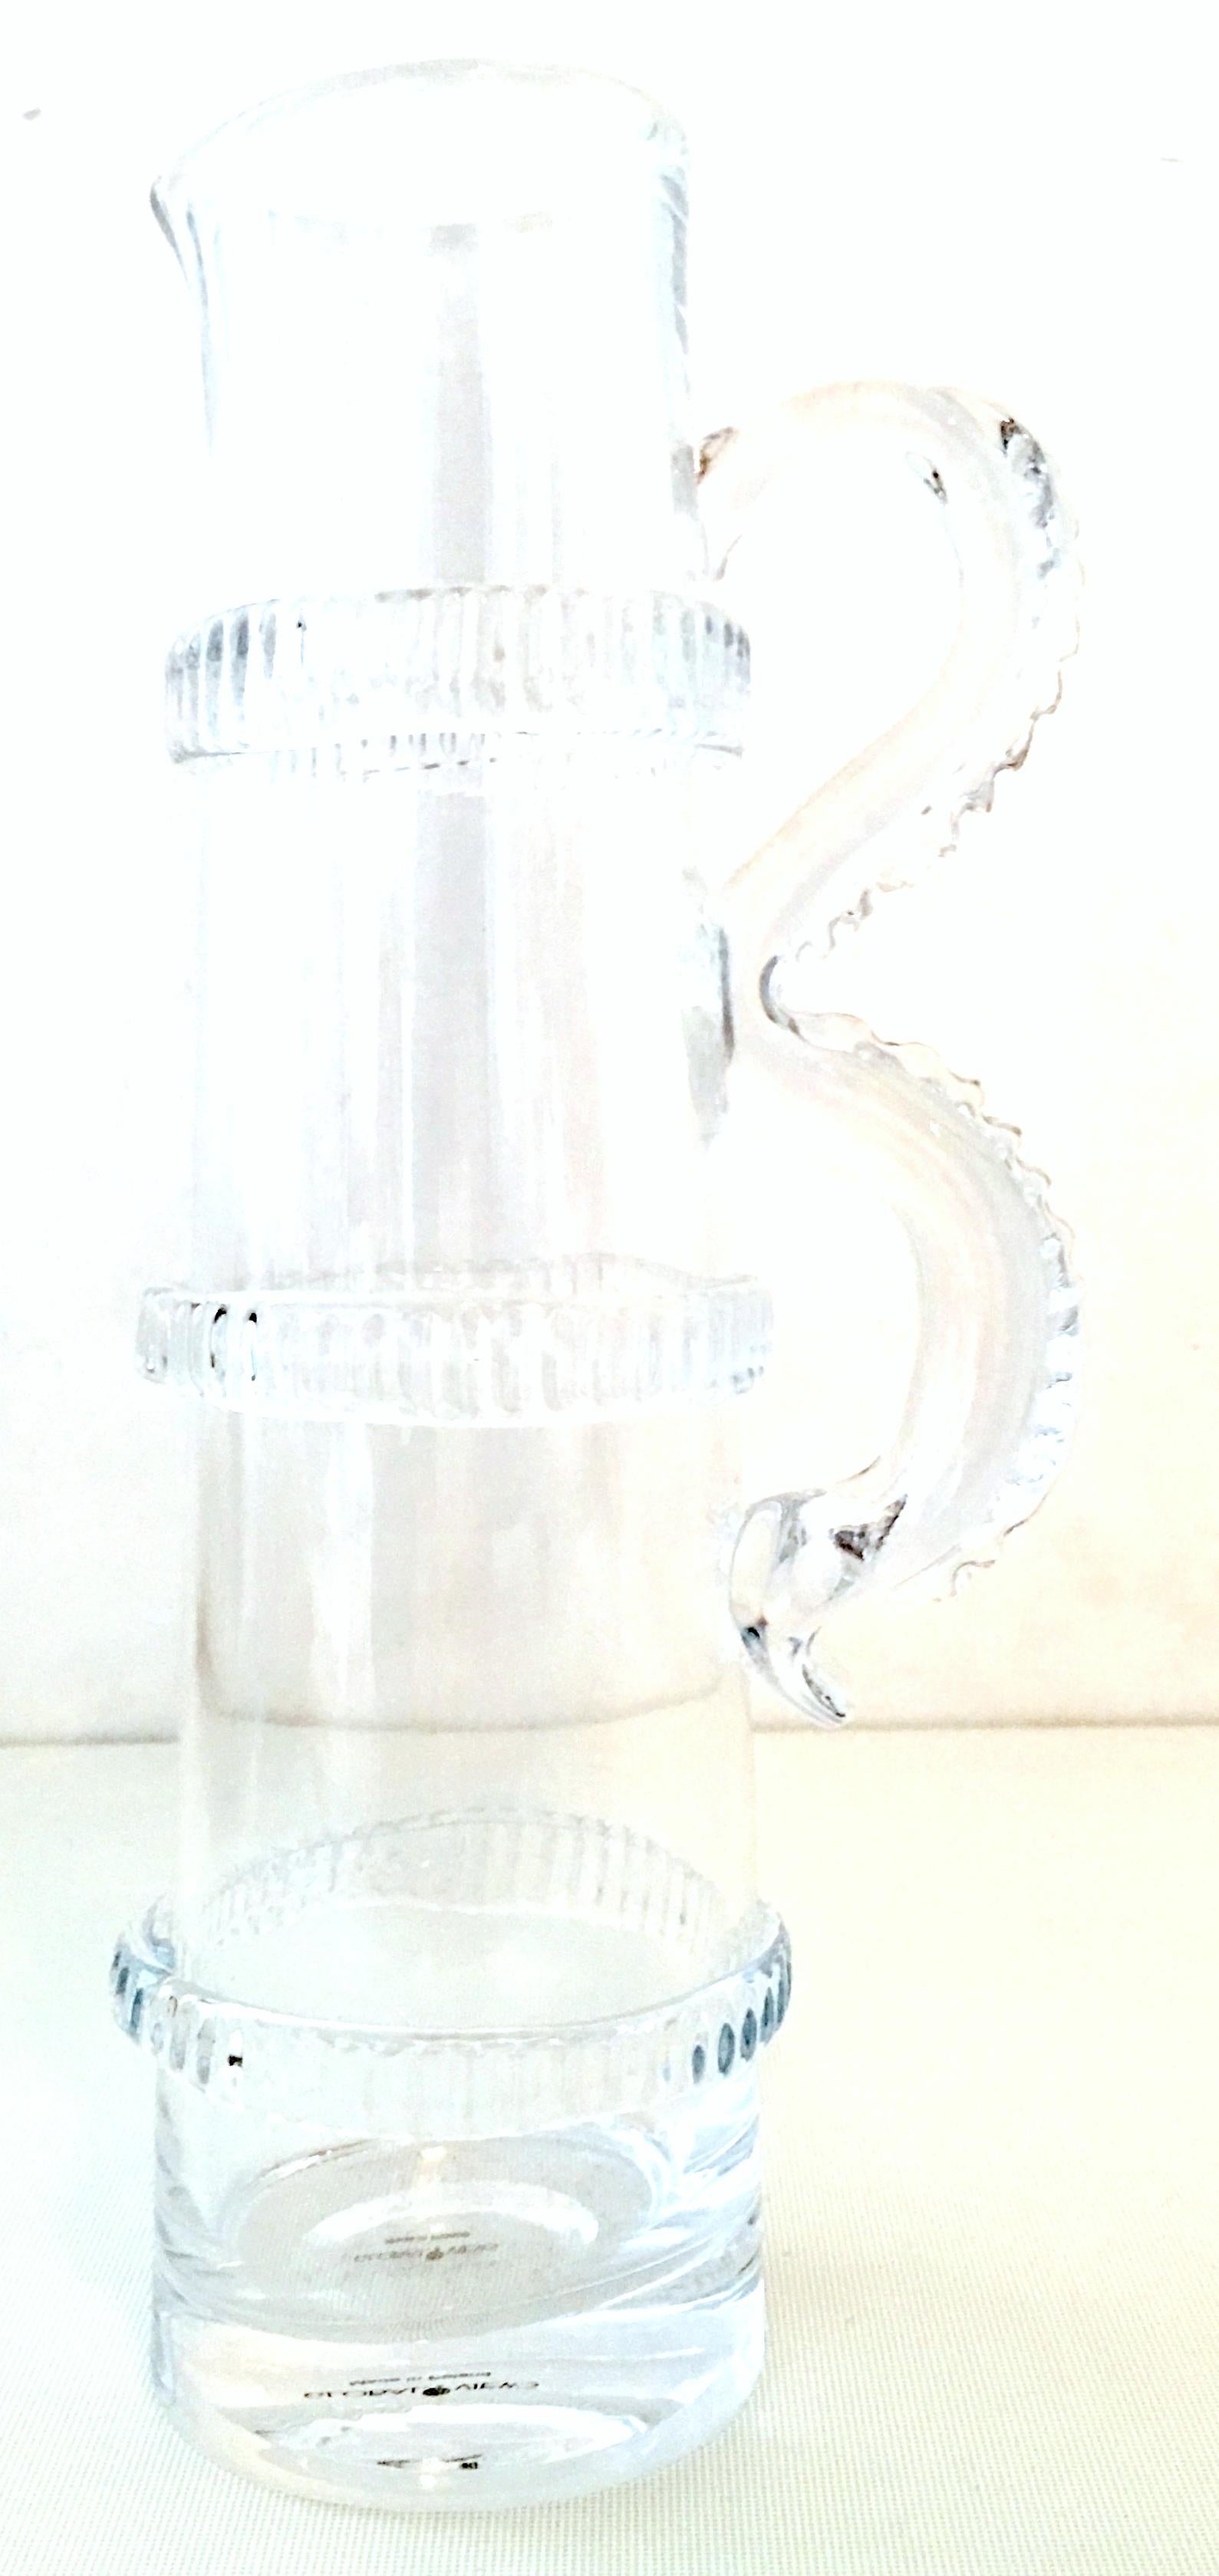 21st Century Contemporary & new cut to clear crystal faux bamboo motif with applied handle beverage pitcher.